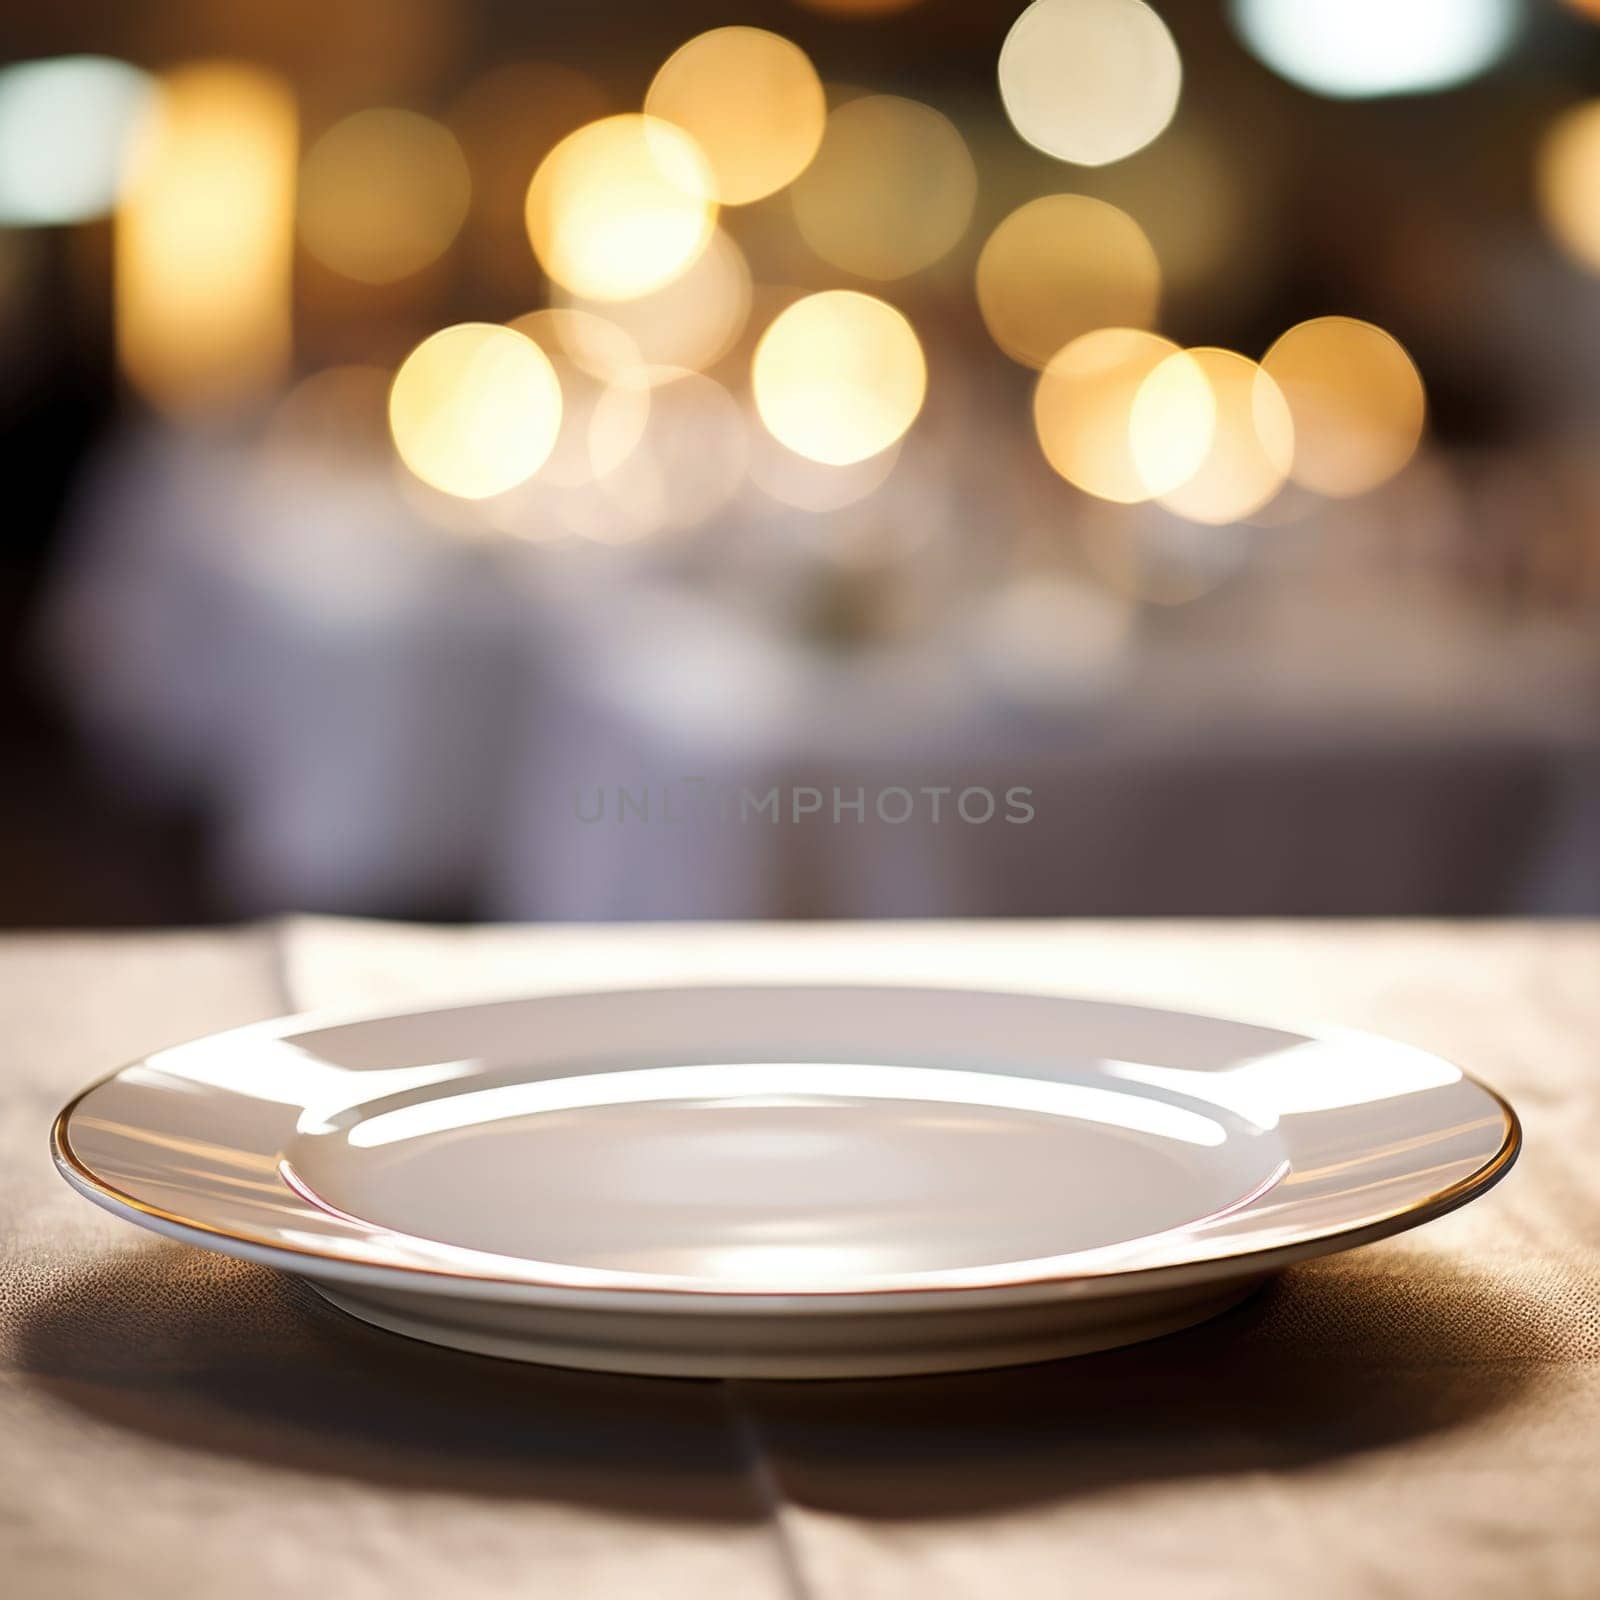 Empty plate on table in restaurant with blurred background